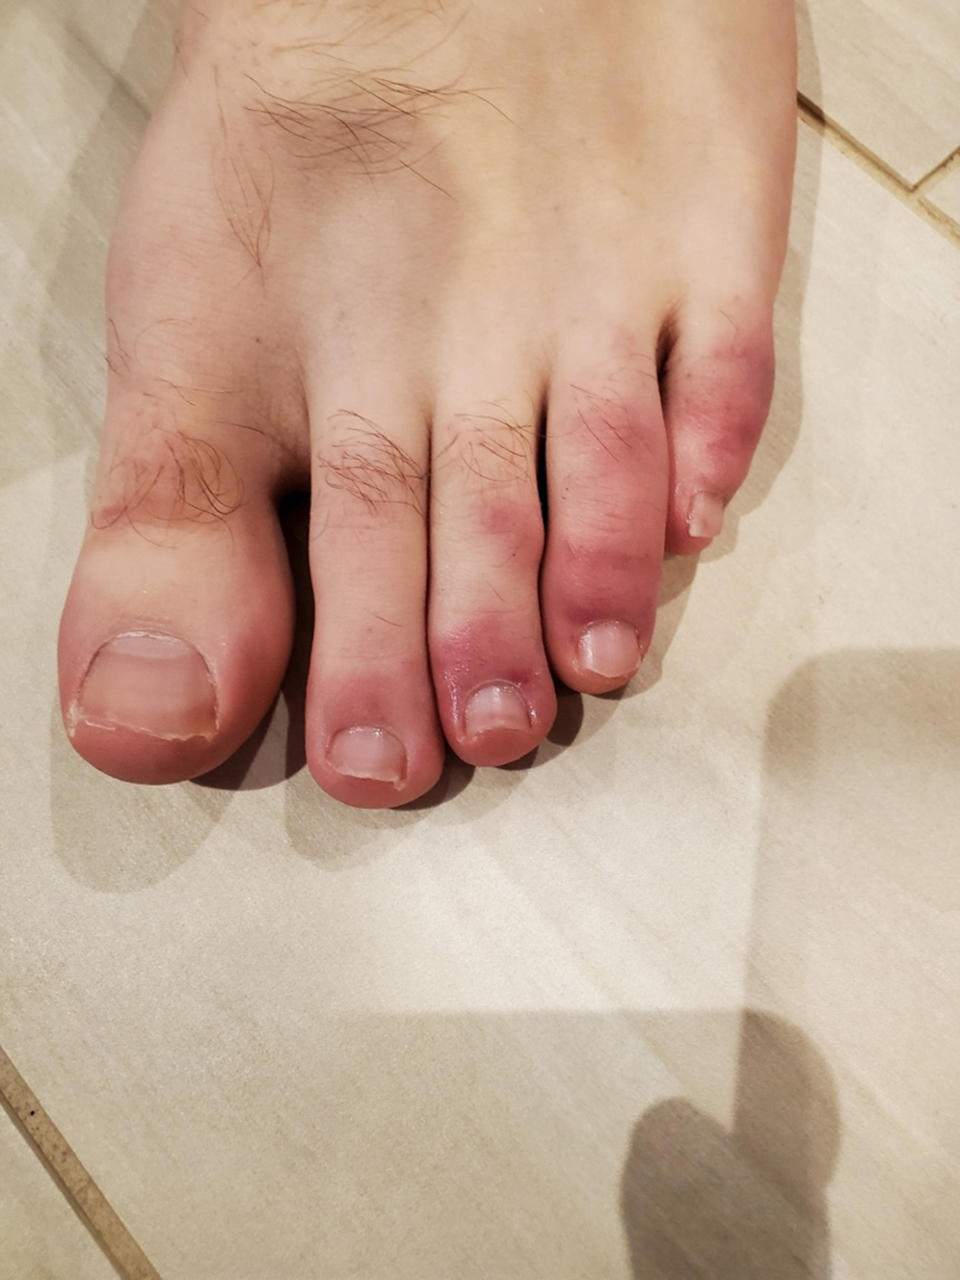 Dr. Tracey Vlahovic had a 30-year-old asymptomatic male patient with what appeared to be COVID toes because there's 